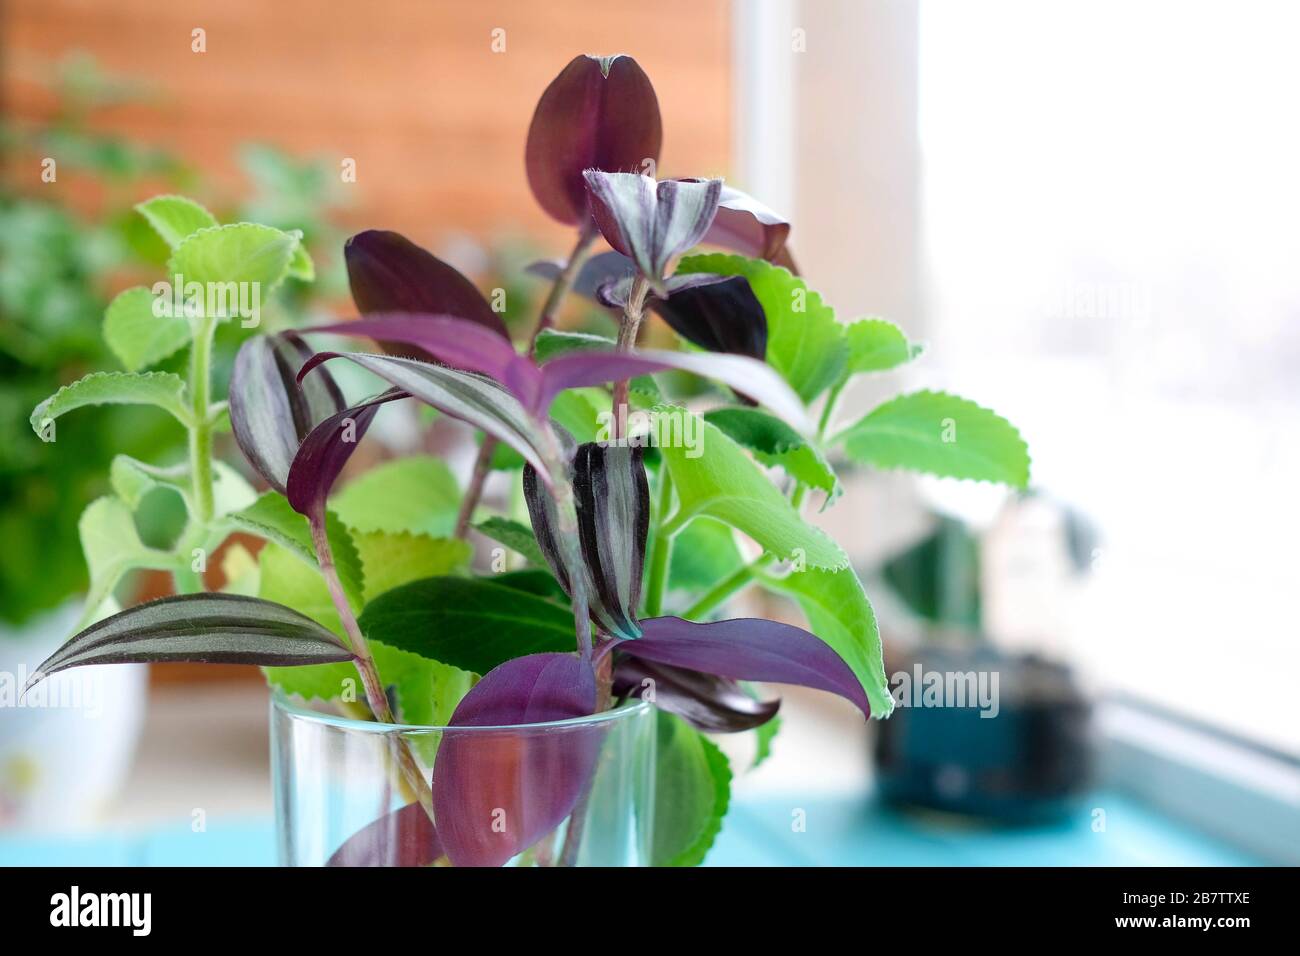 Plants in a glass. Green and burgundy sprouts in the water. Zebrina and Amboynus close-up. Stock Photo